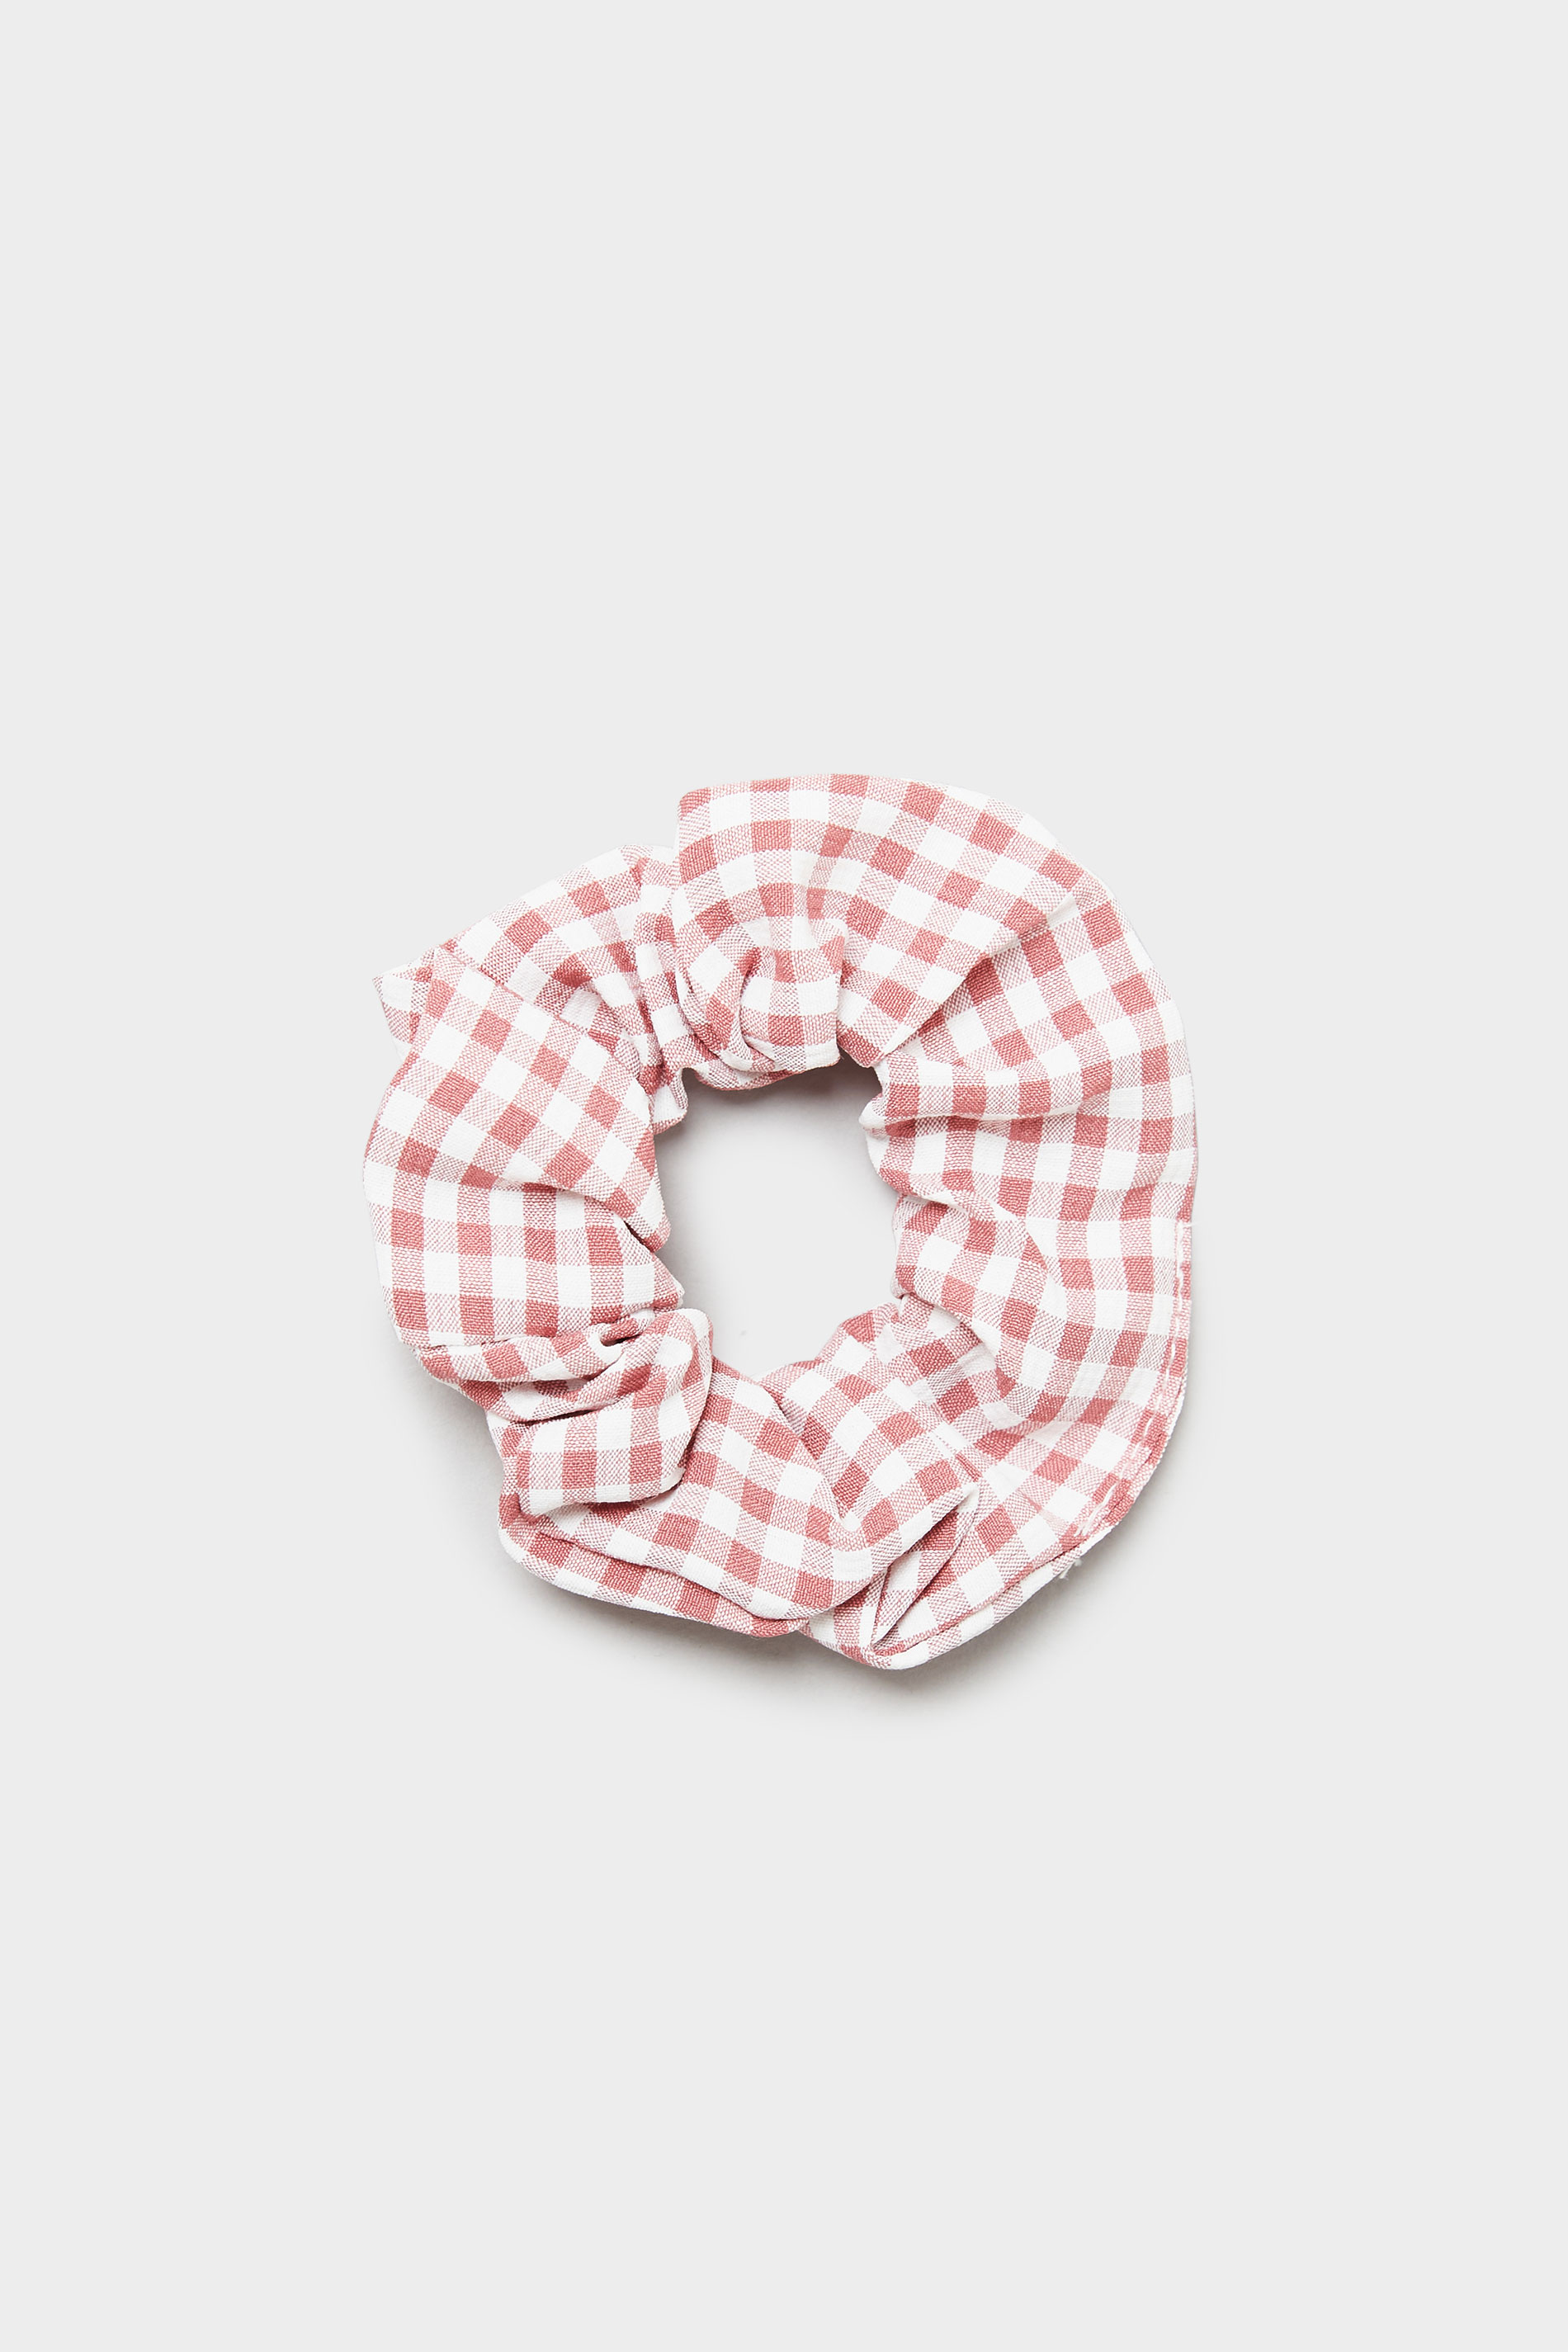 Holiday Party Pack Same Size Scrunchies Red  Gingham Scrunchies 9 Scrunchies Silky Red Check